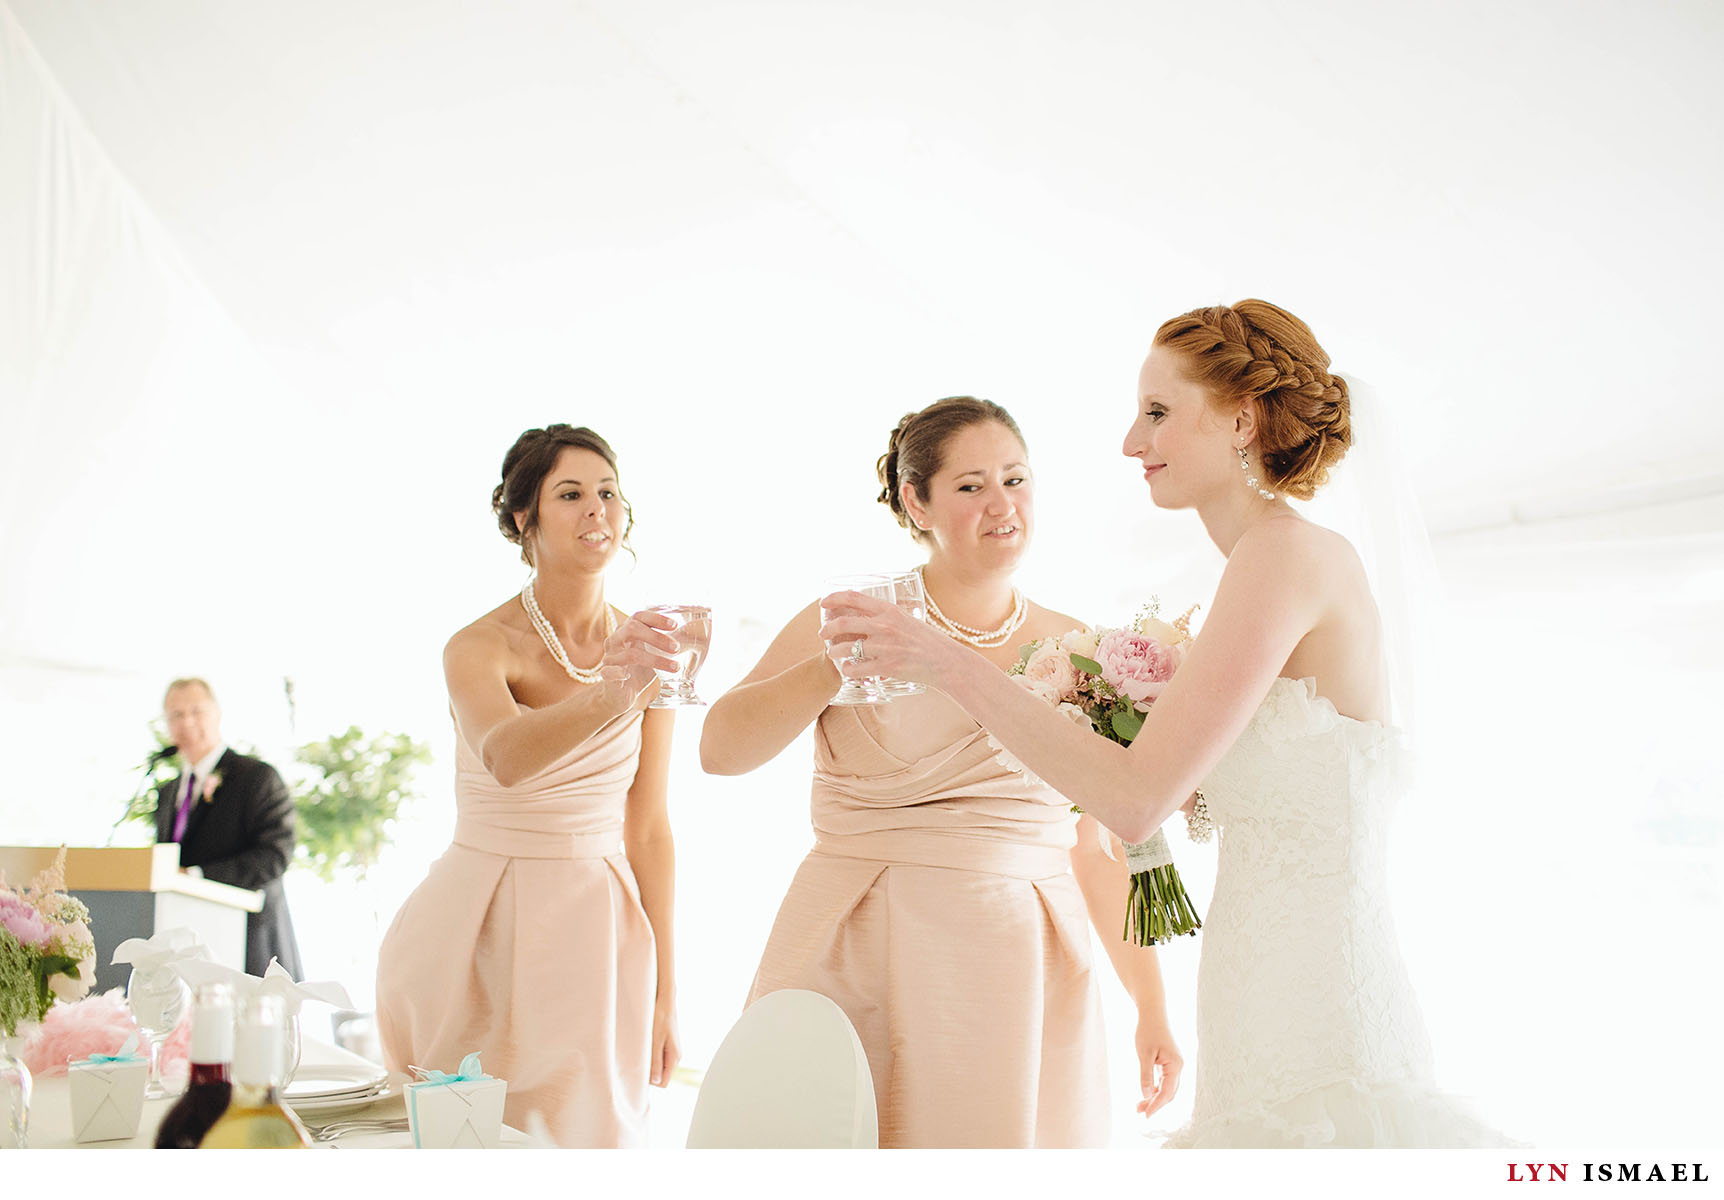 Bride toasts with her bridesmaids at a Nithridge Estate Wedding.